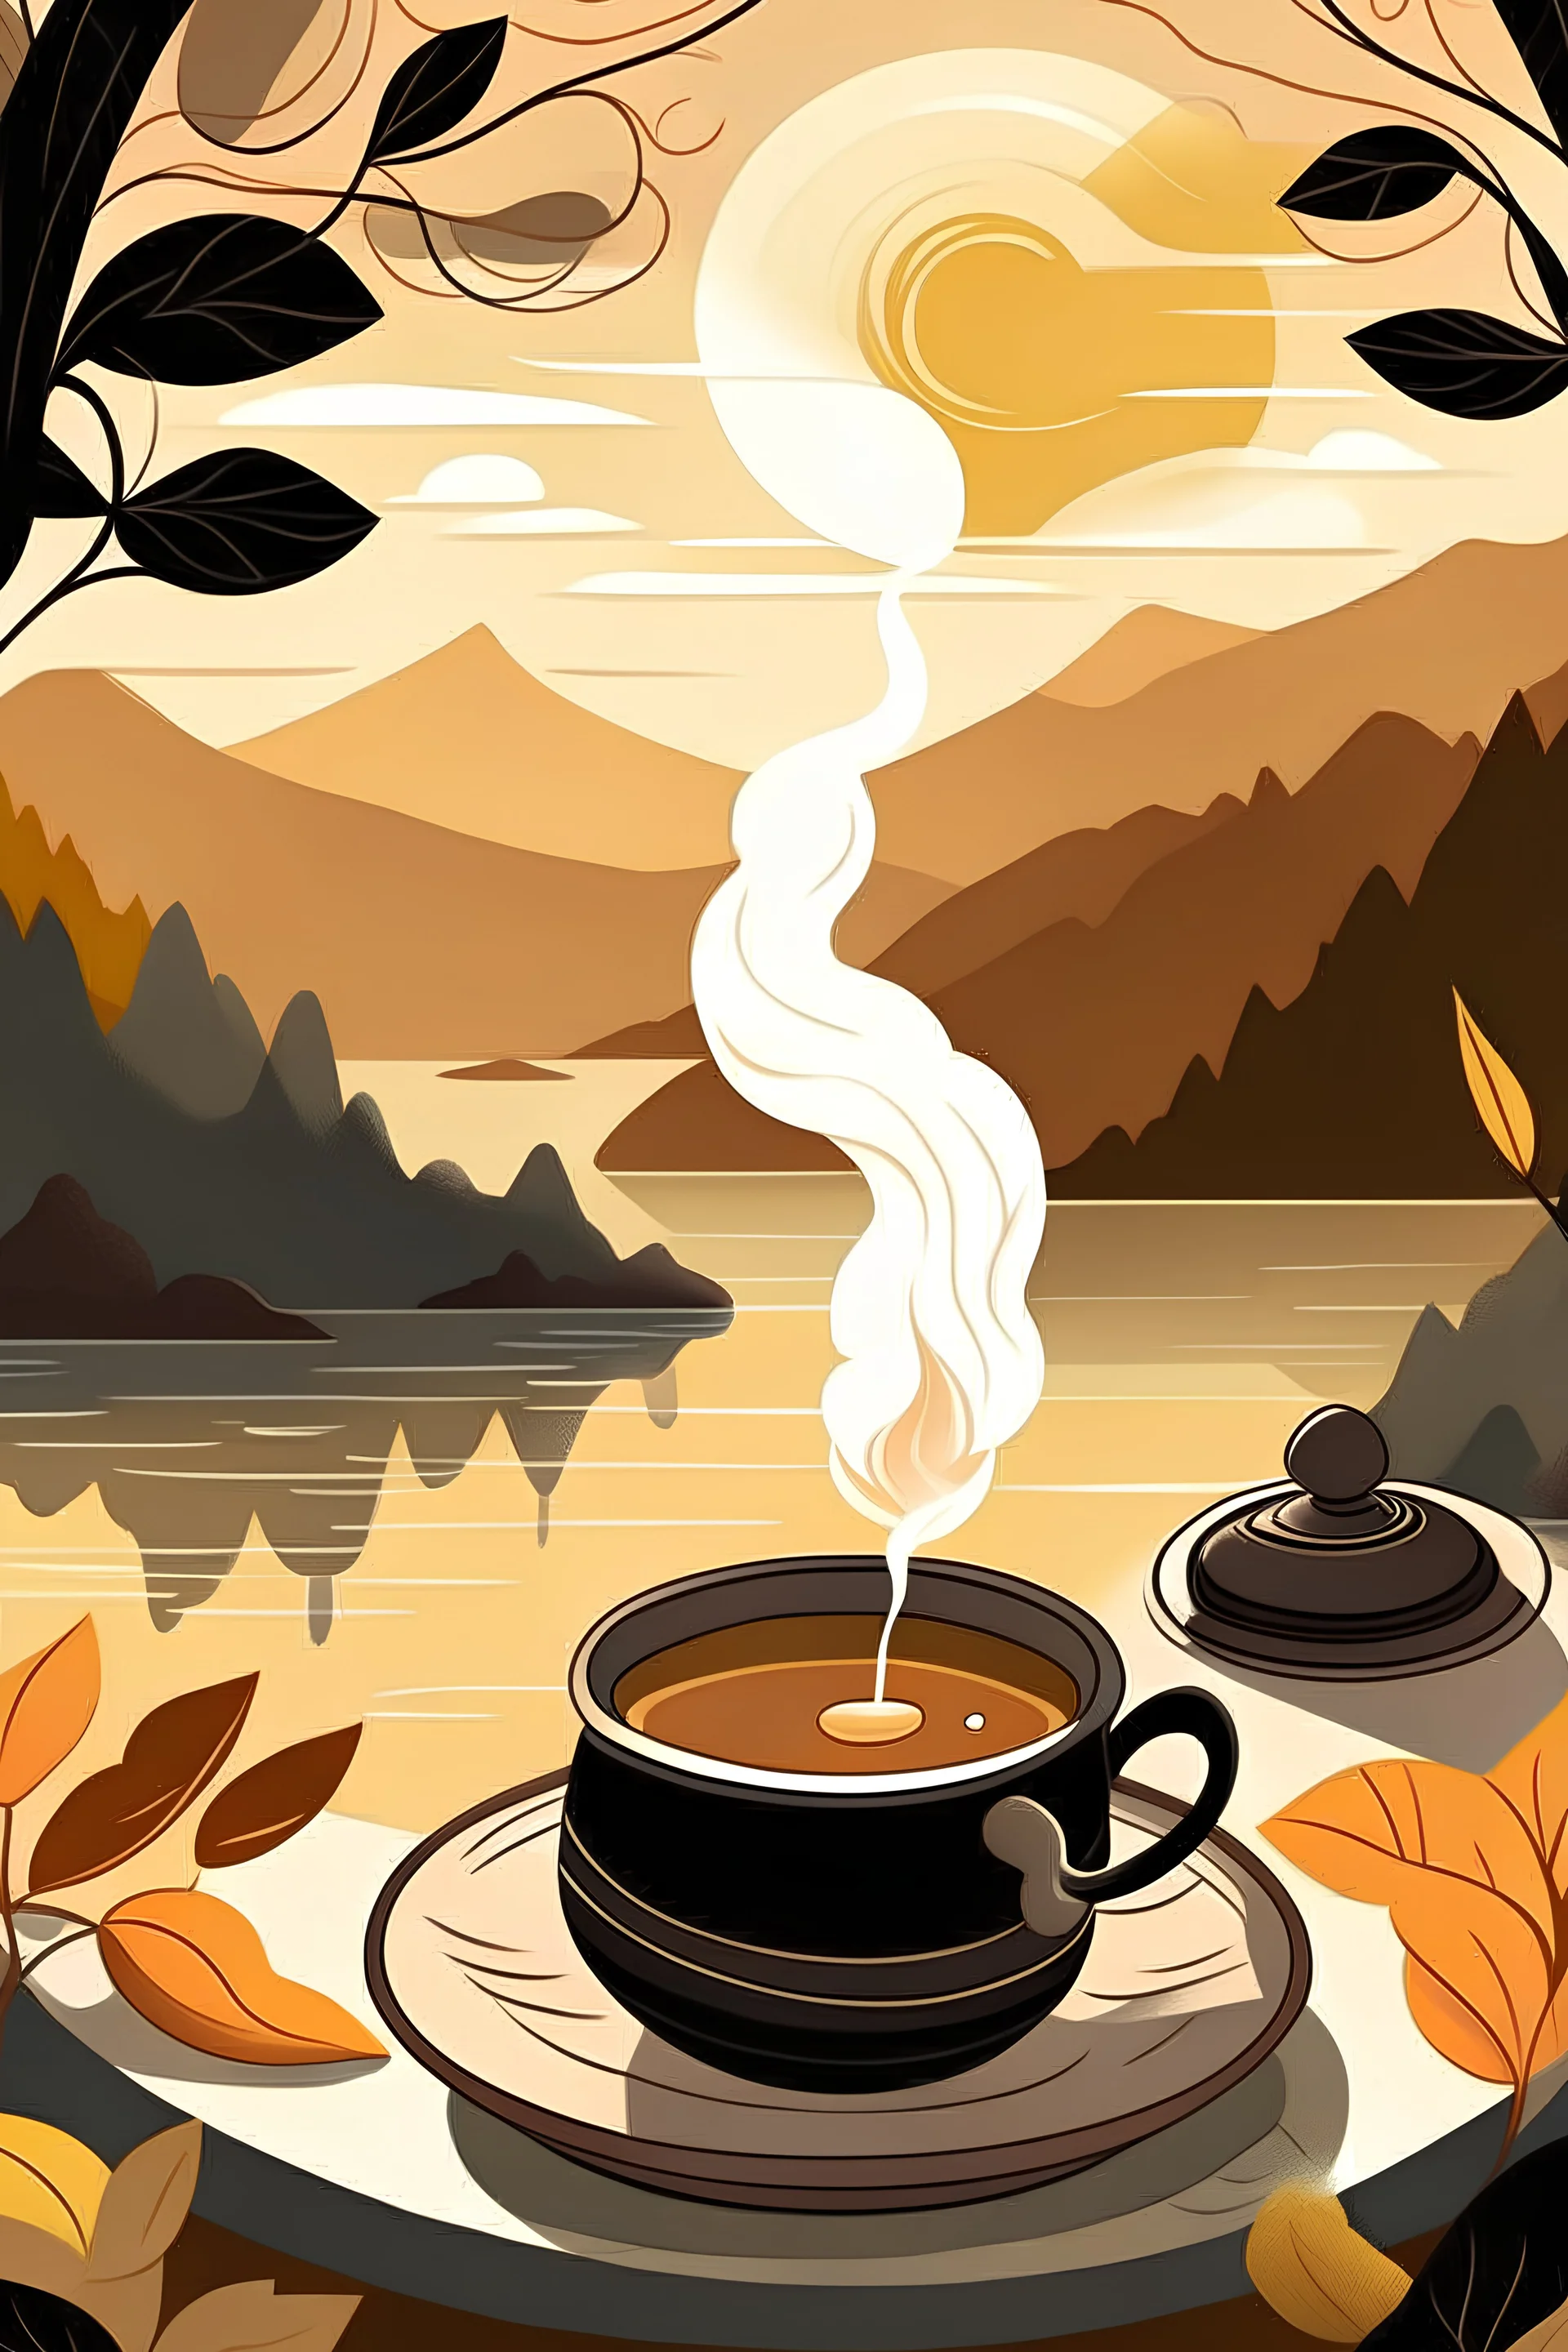 "Illustrate a cozy morning scene with a steaming mug of Honey and Warm Water, surrounded by elements symbolizing stability and tranquility, such as a sunrise or serene natural surroundings."